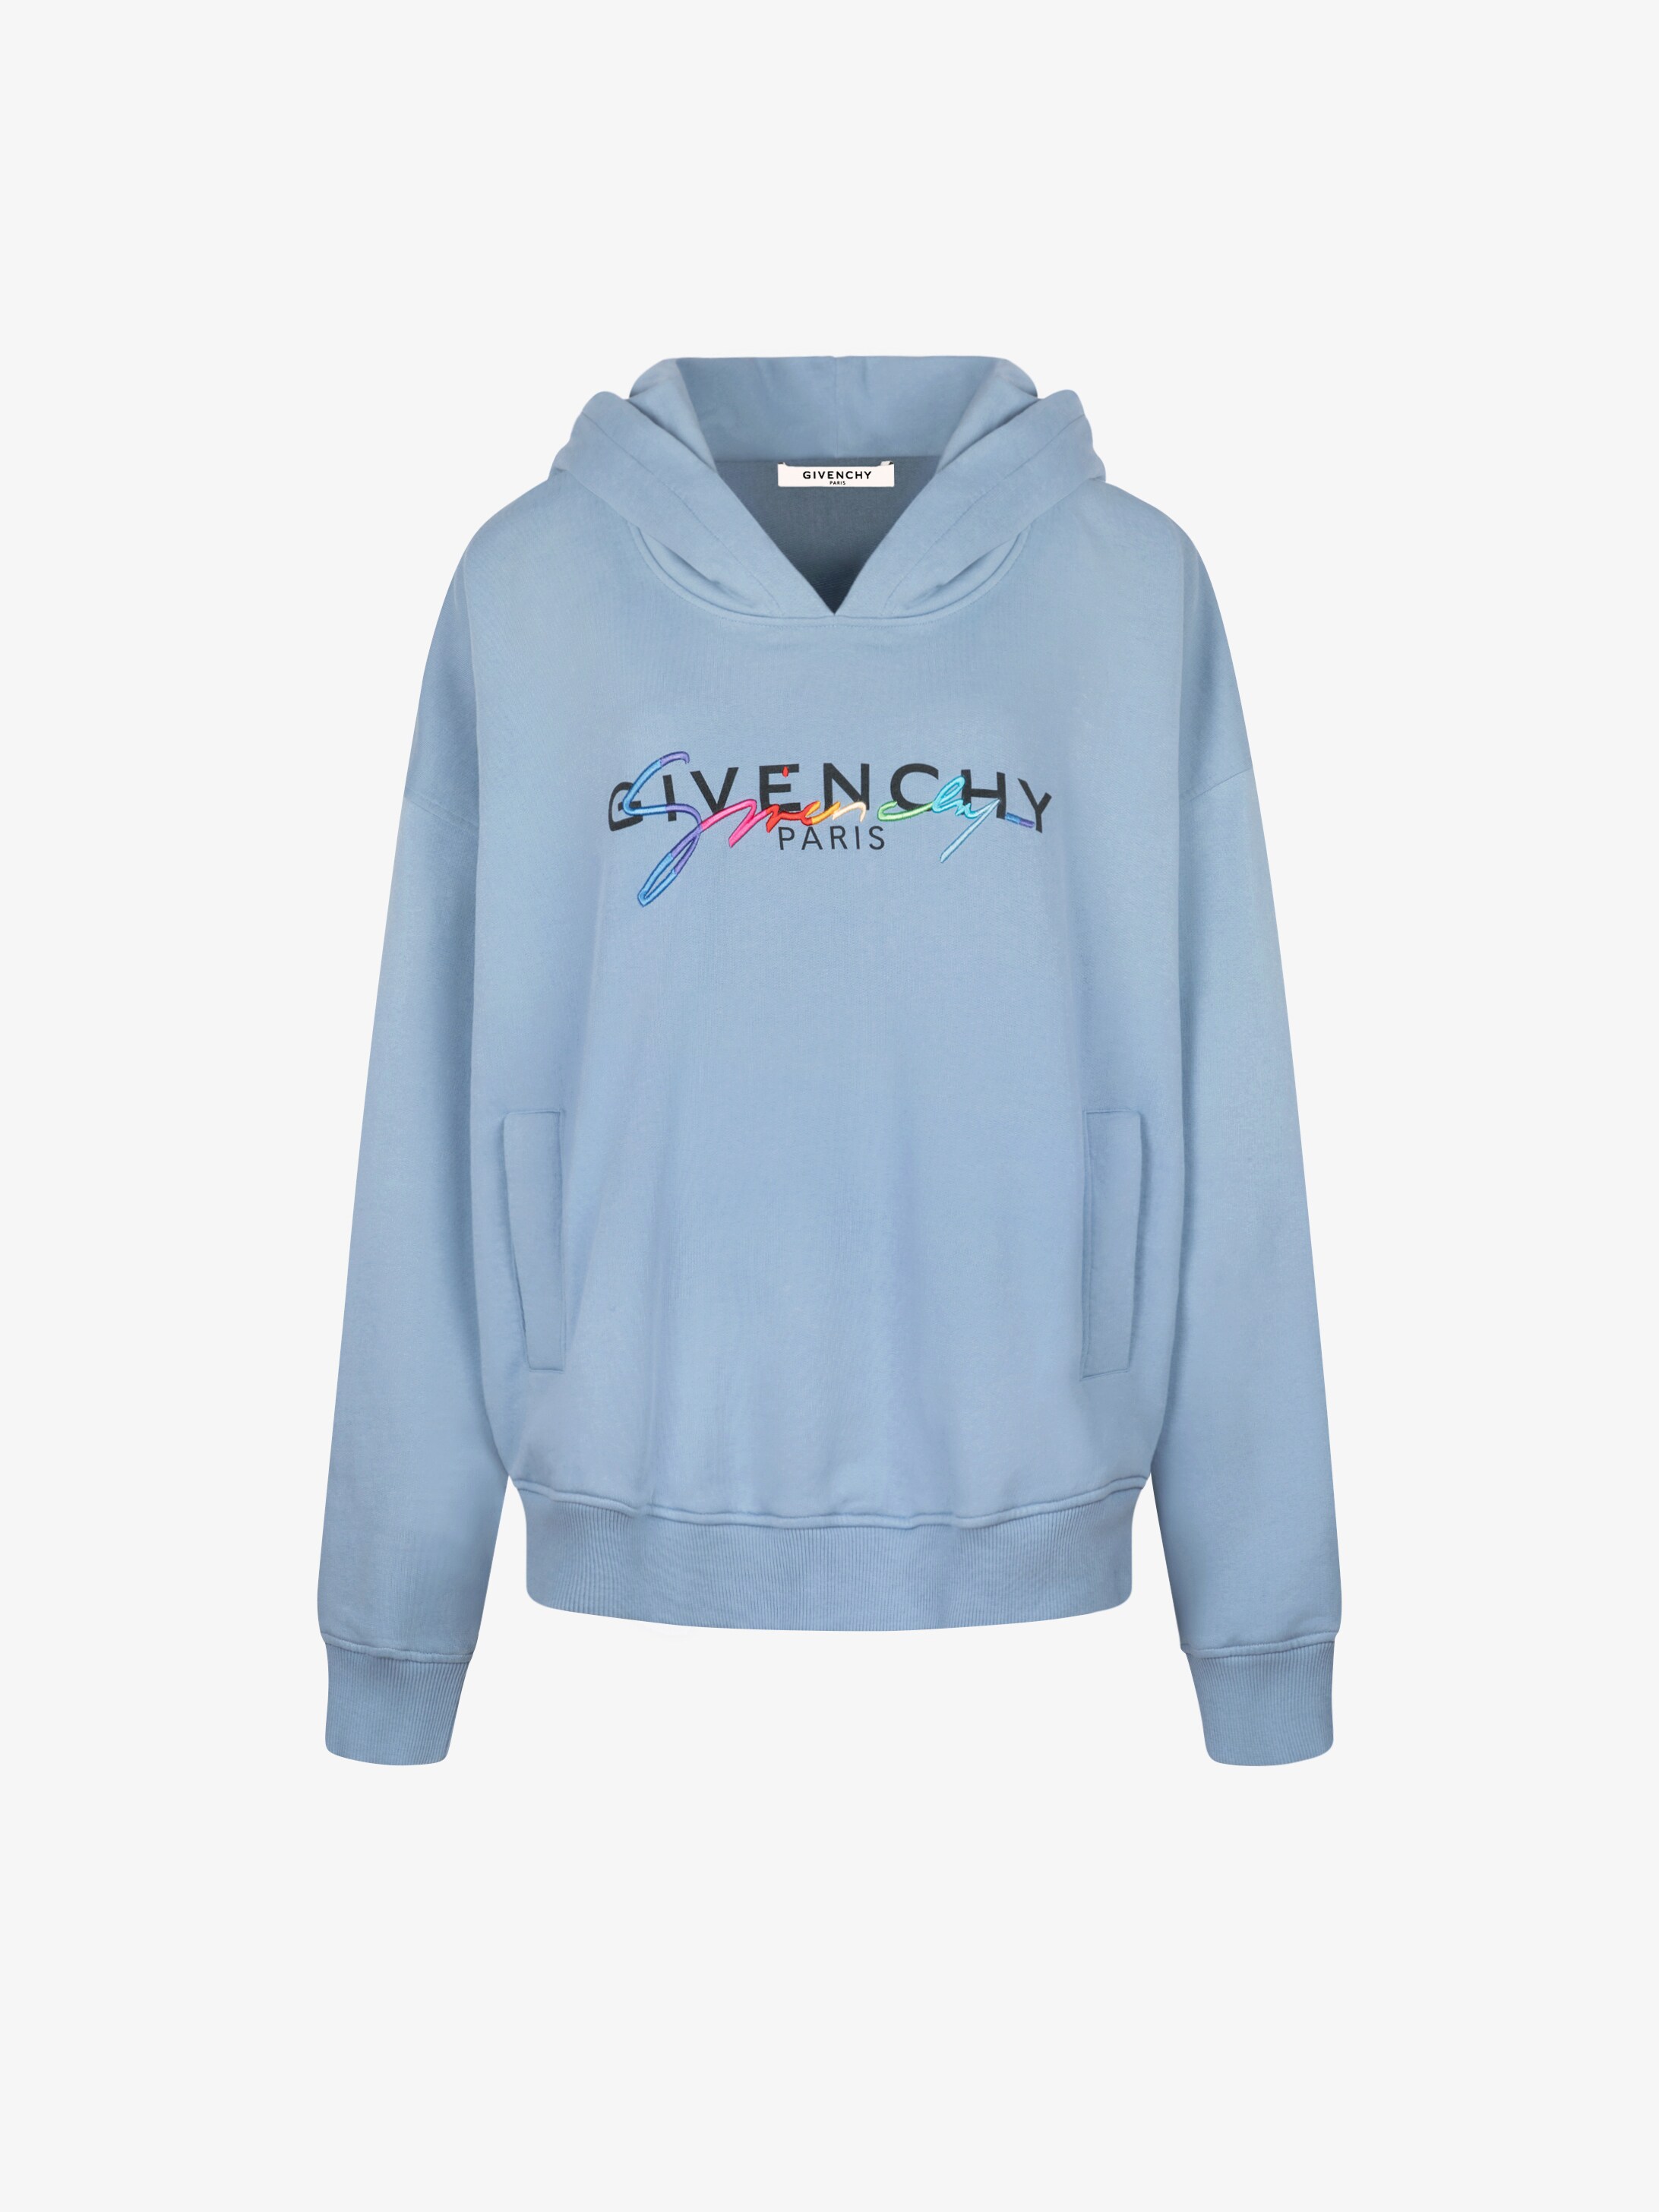 oversized givenchy hoodie